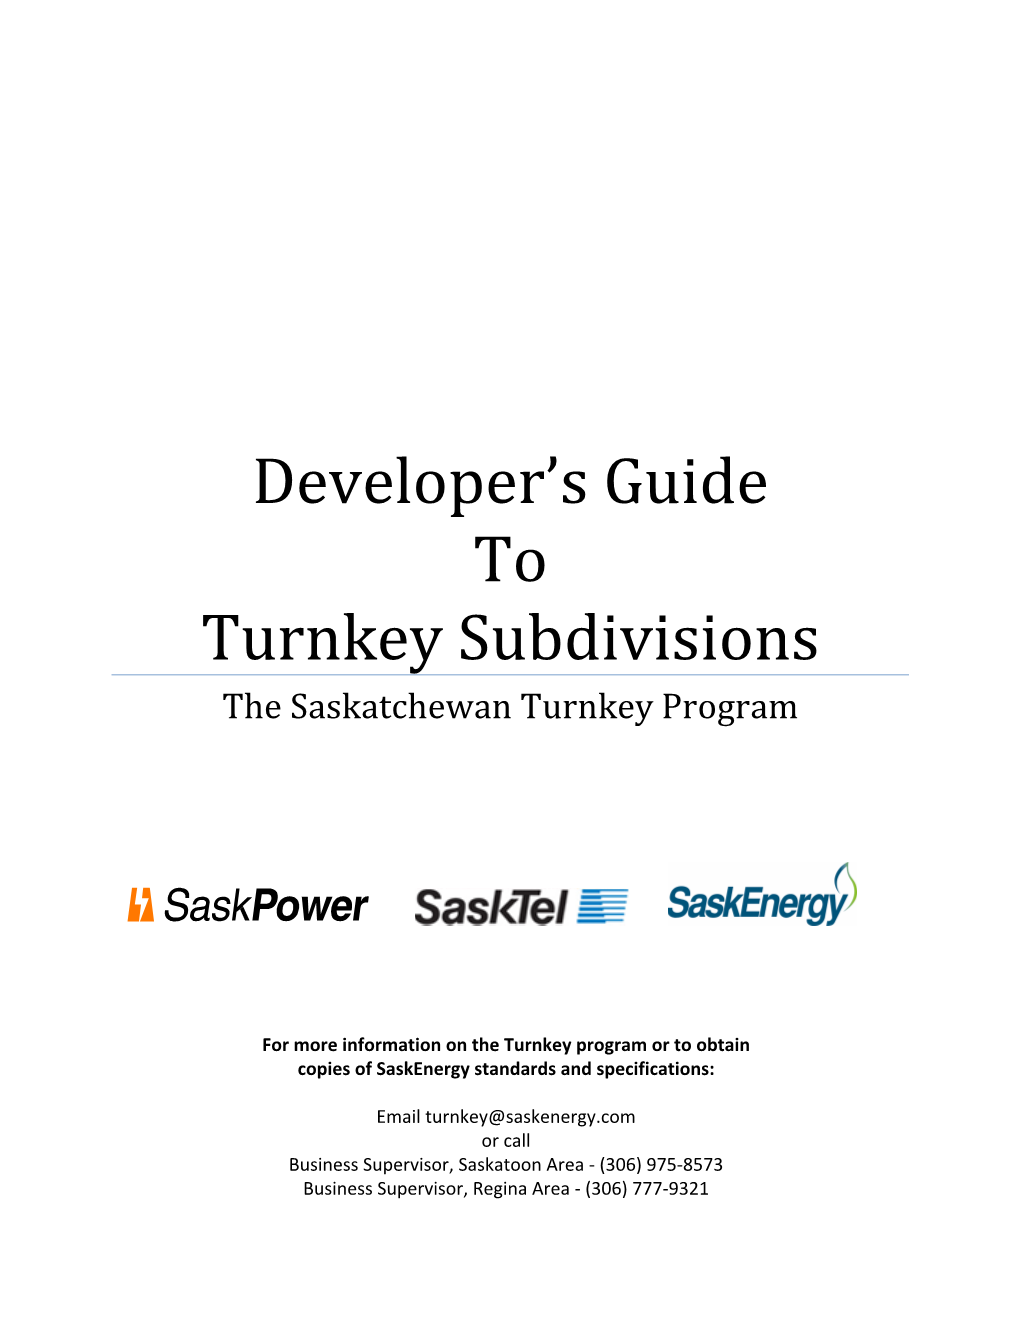 Developer's Guide to Turnkey Subdivisions